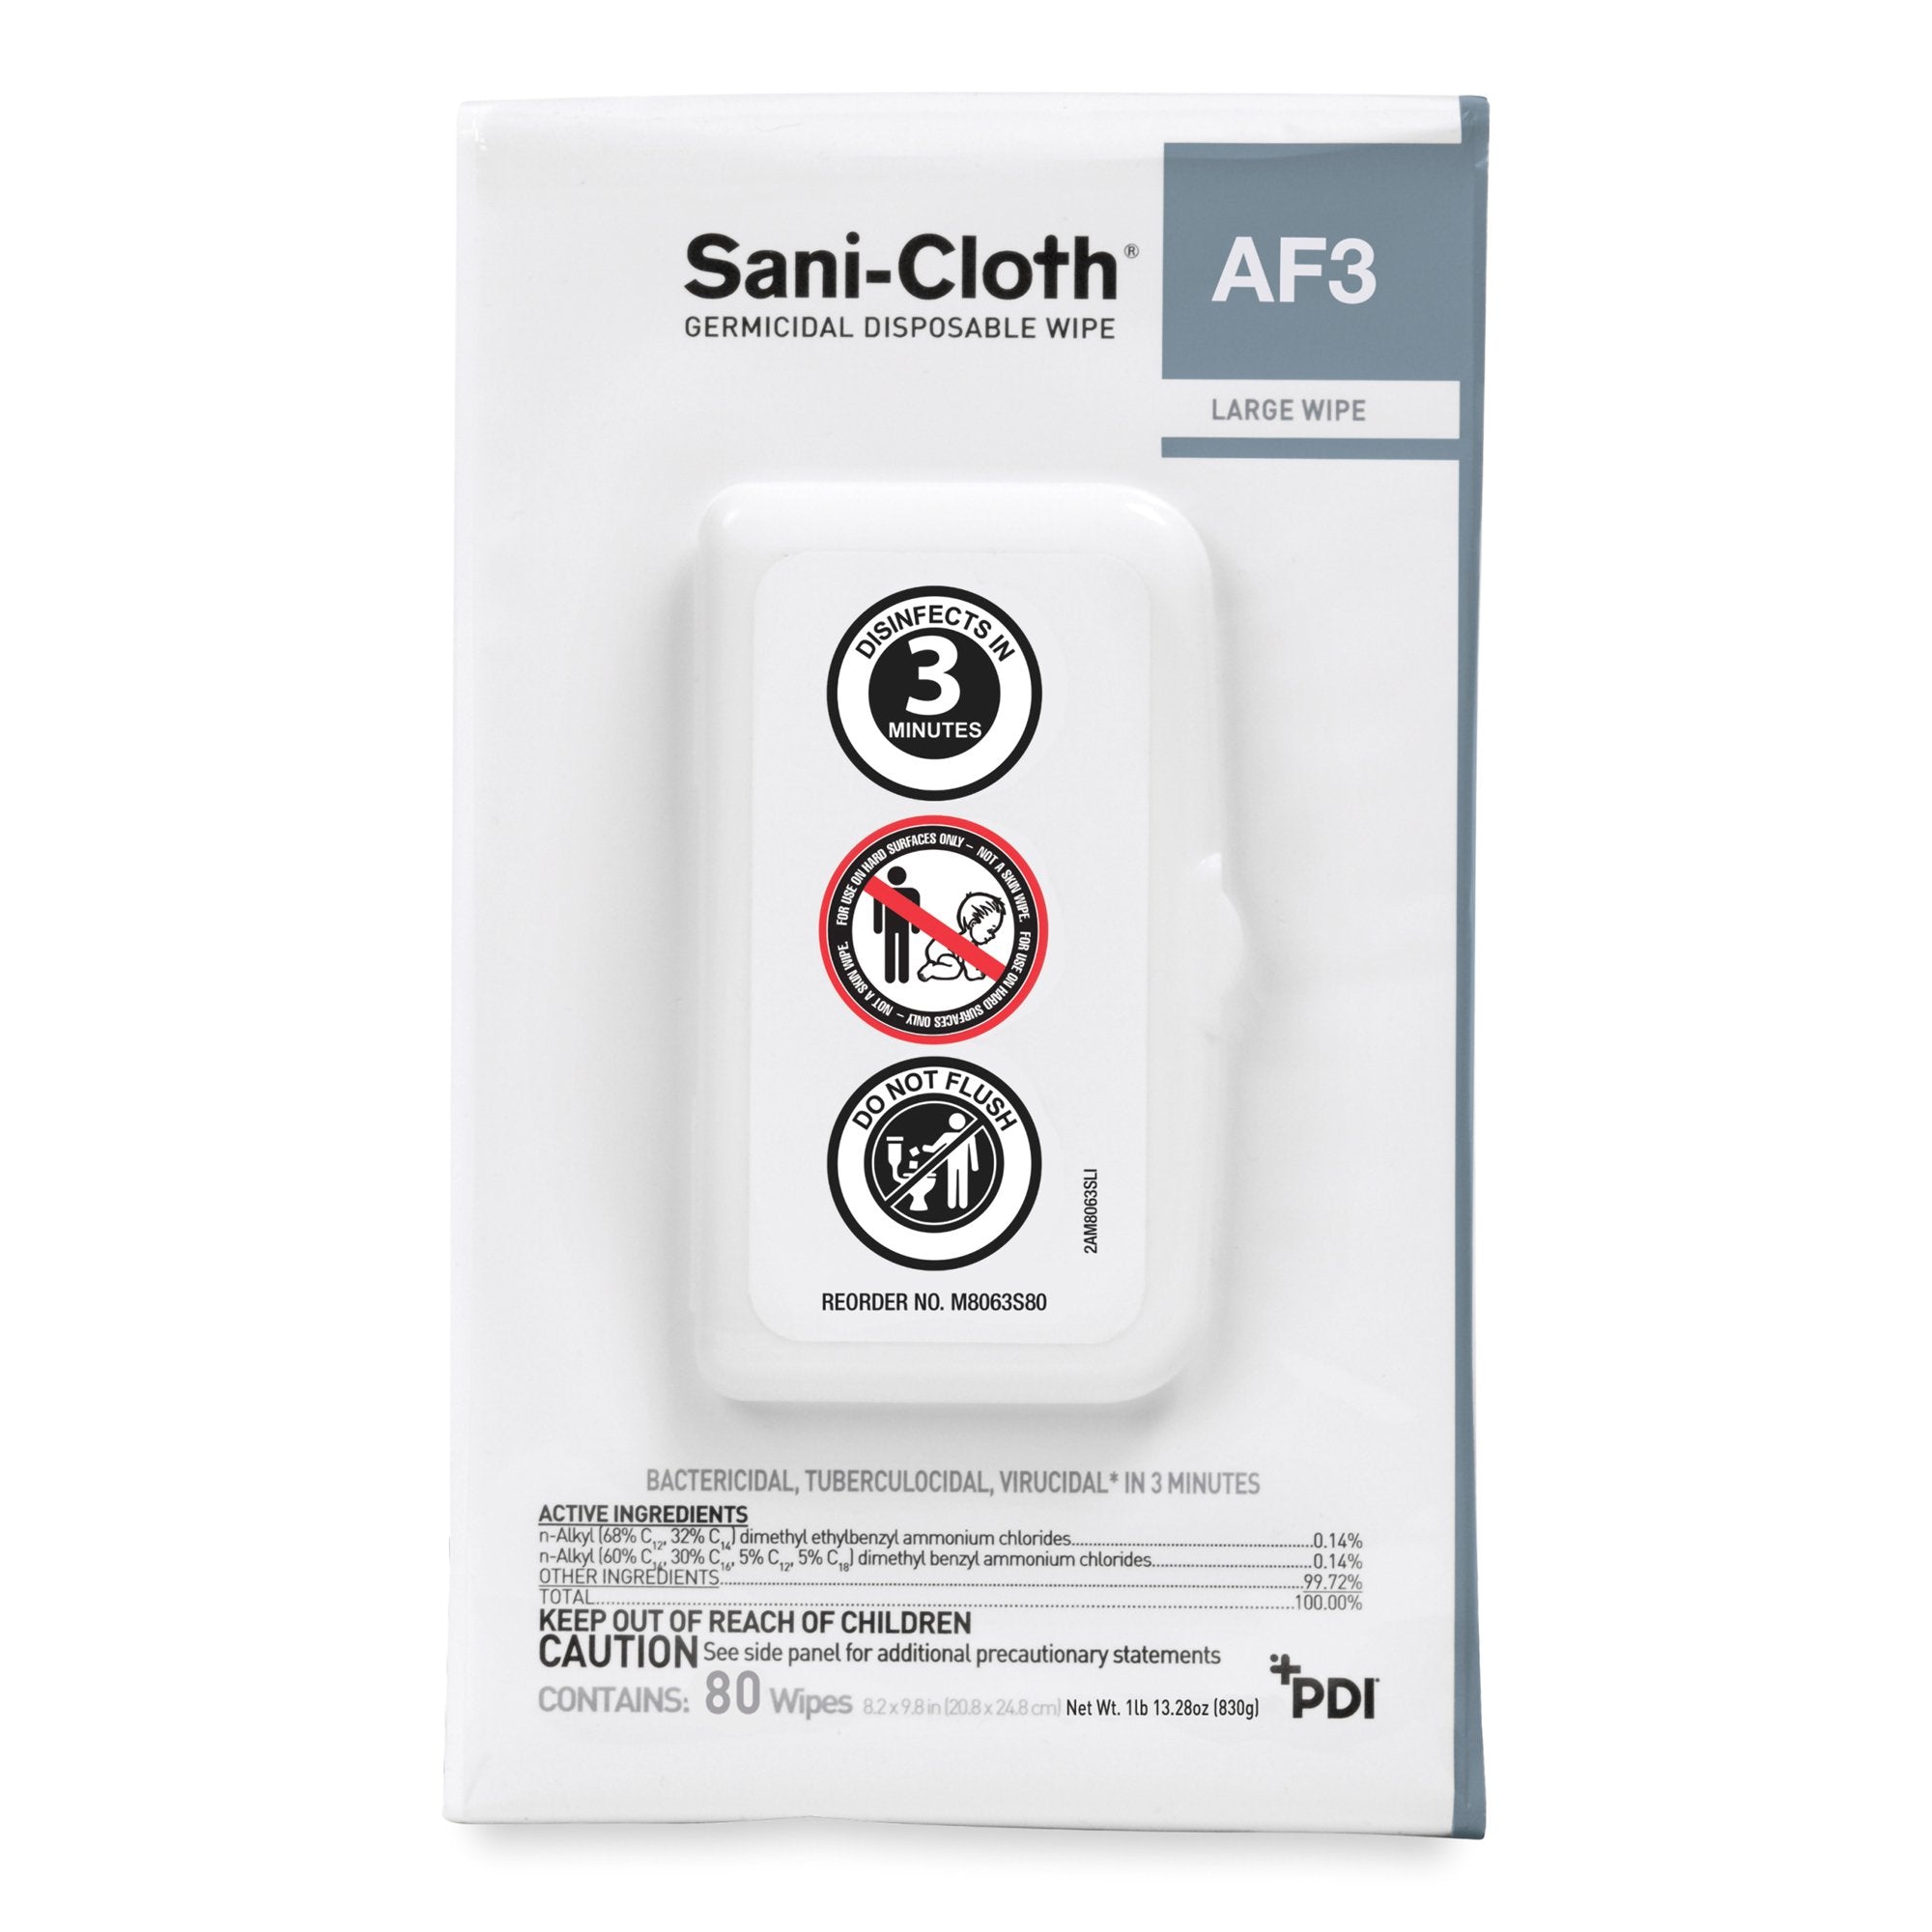 Sani-Cloth® AF3 Surface Disinfectant Cleaner Premoistened Germicidal Manual Pull Wipe 80 Count Hard Case Unscented NonSterile